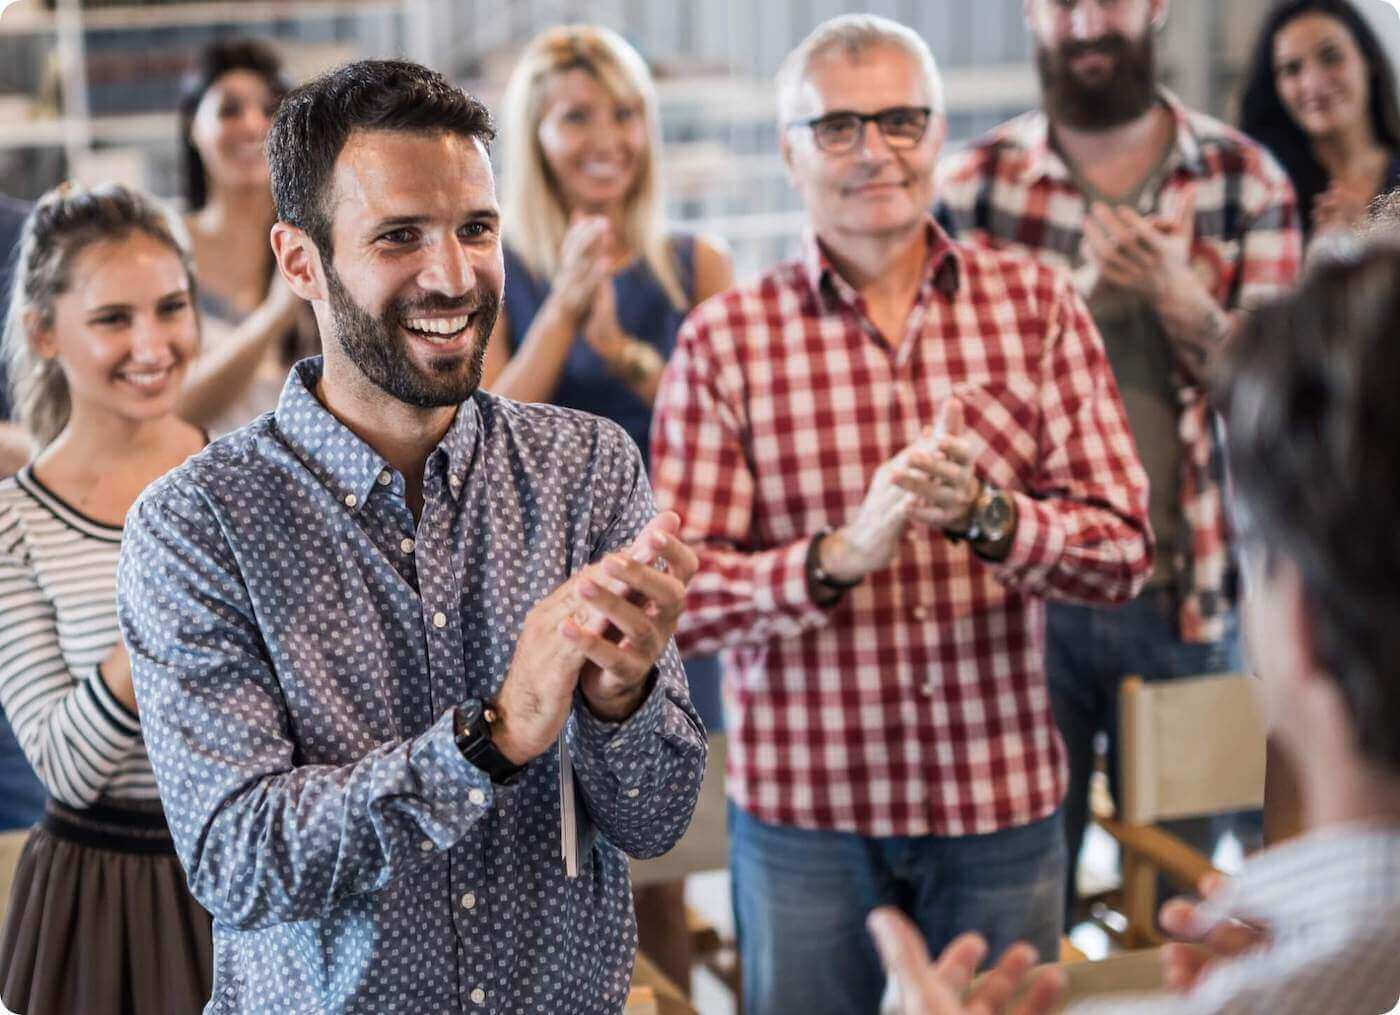 Business team members clapping after a speech